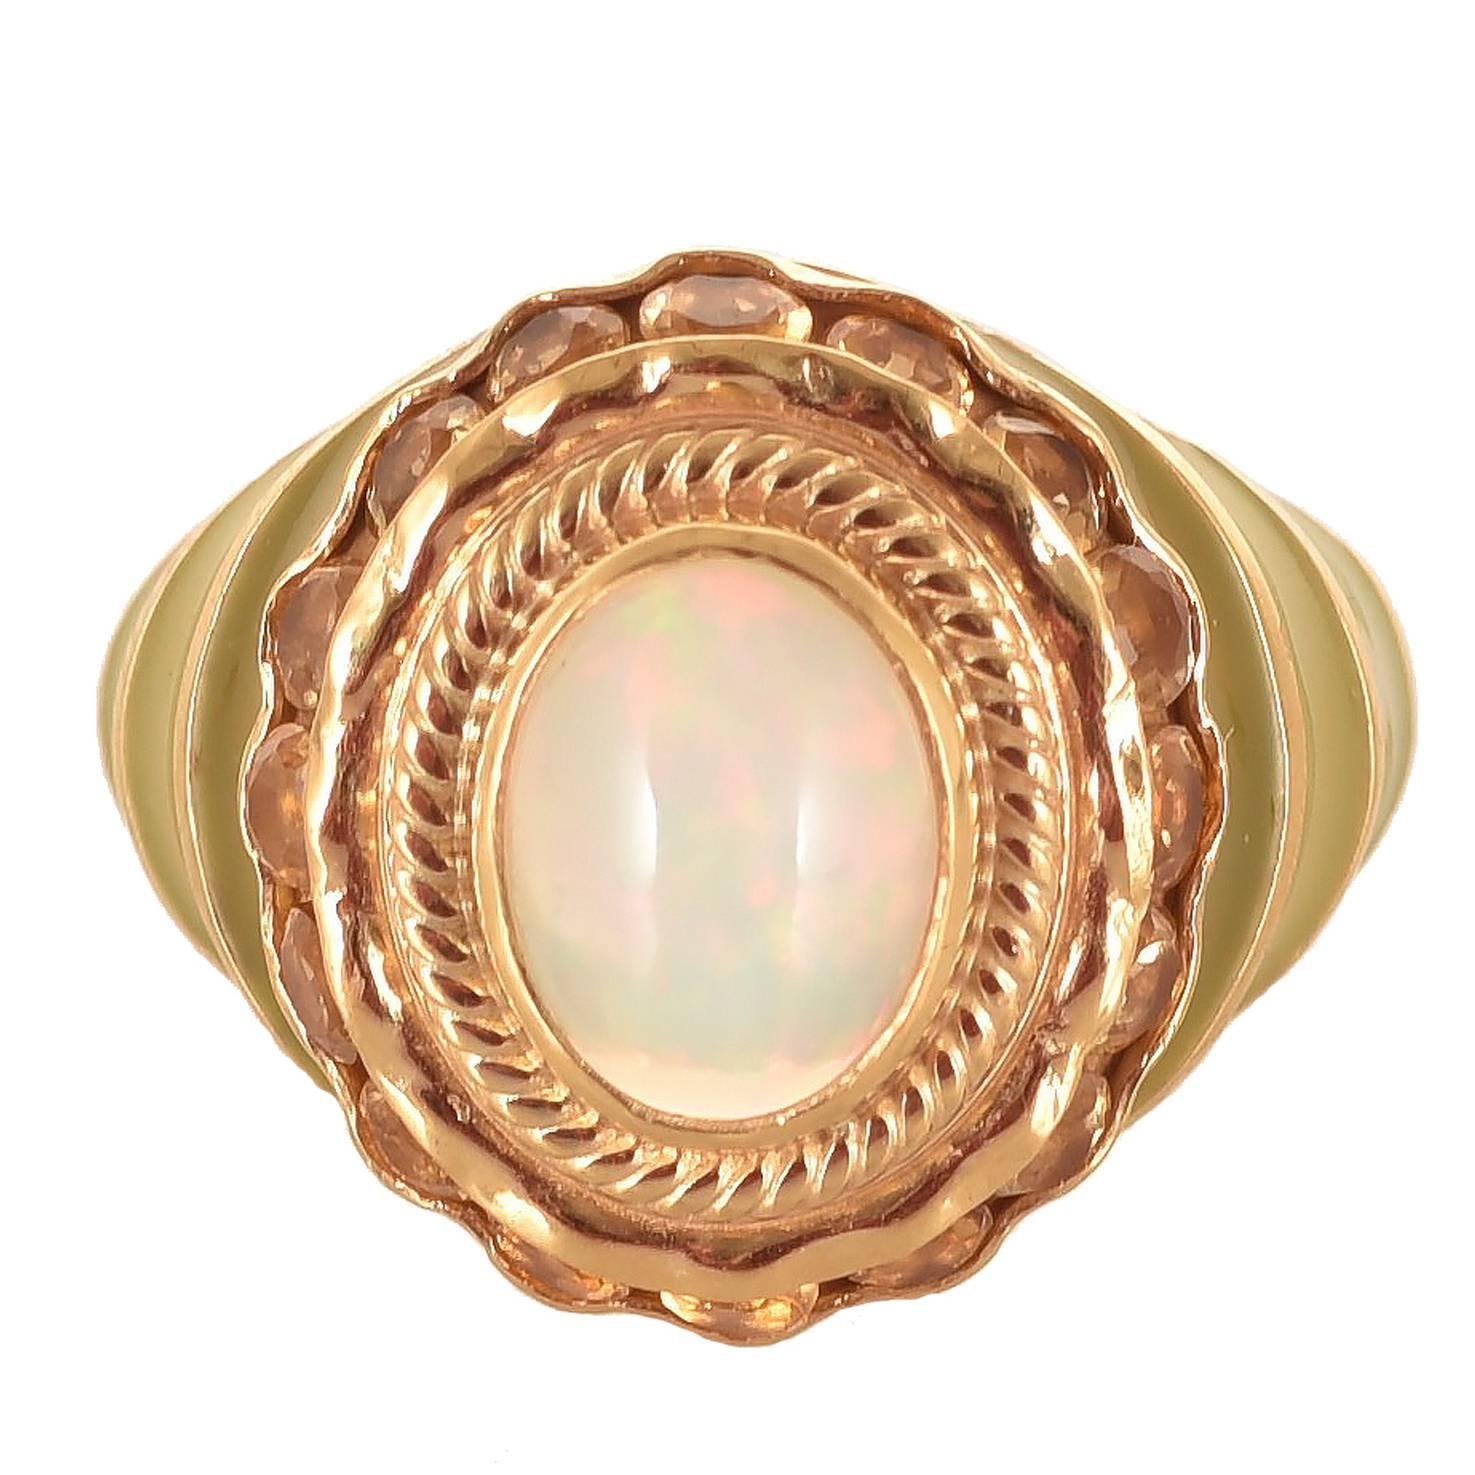 Unique Nine-Karat Gold Ring with Opal and Quartz by Percossi Papi For Sale